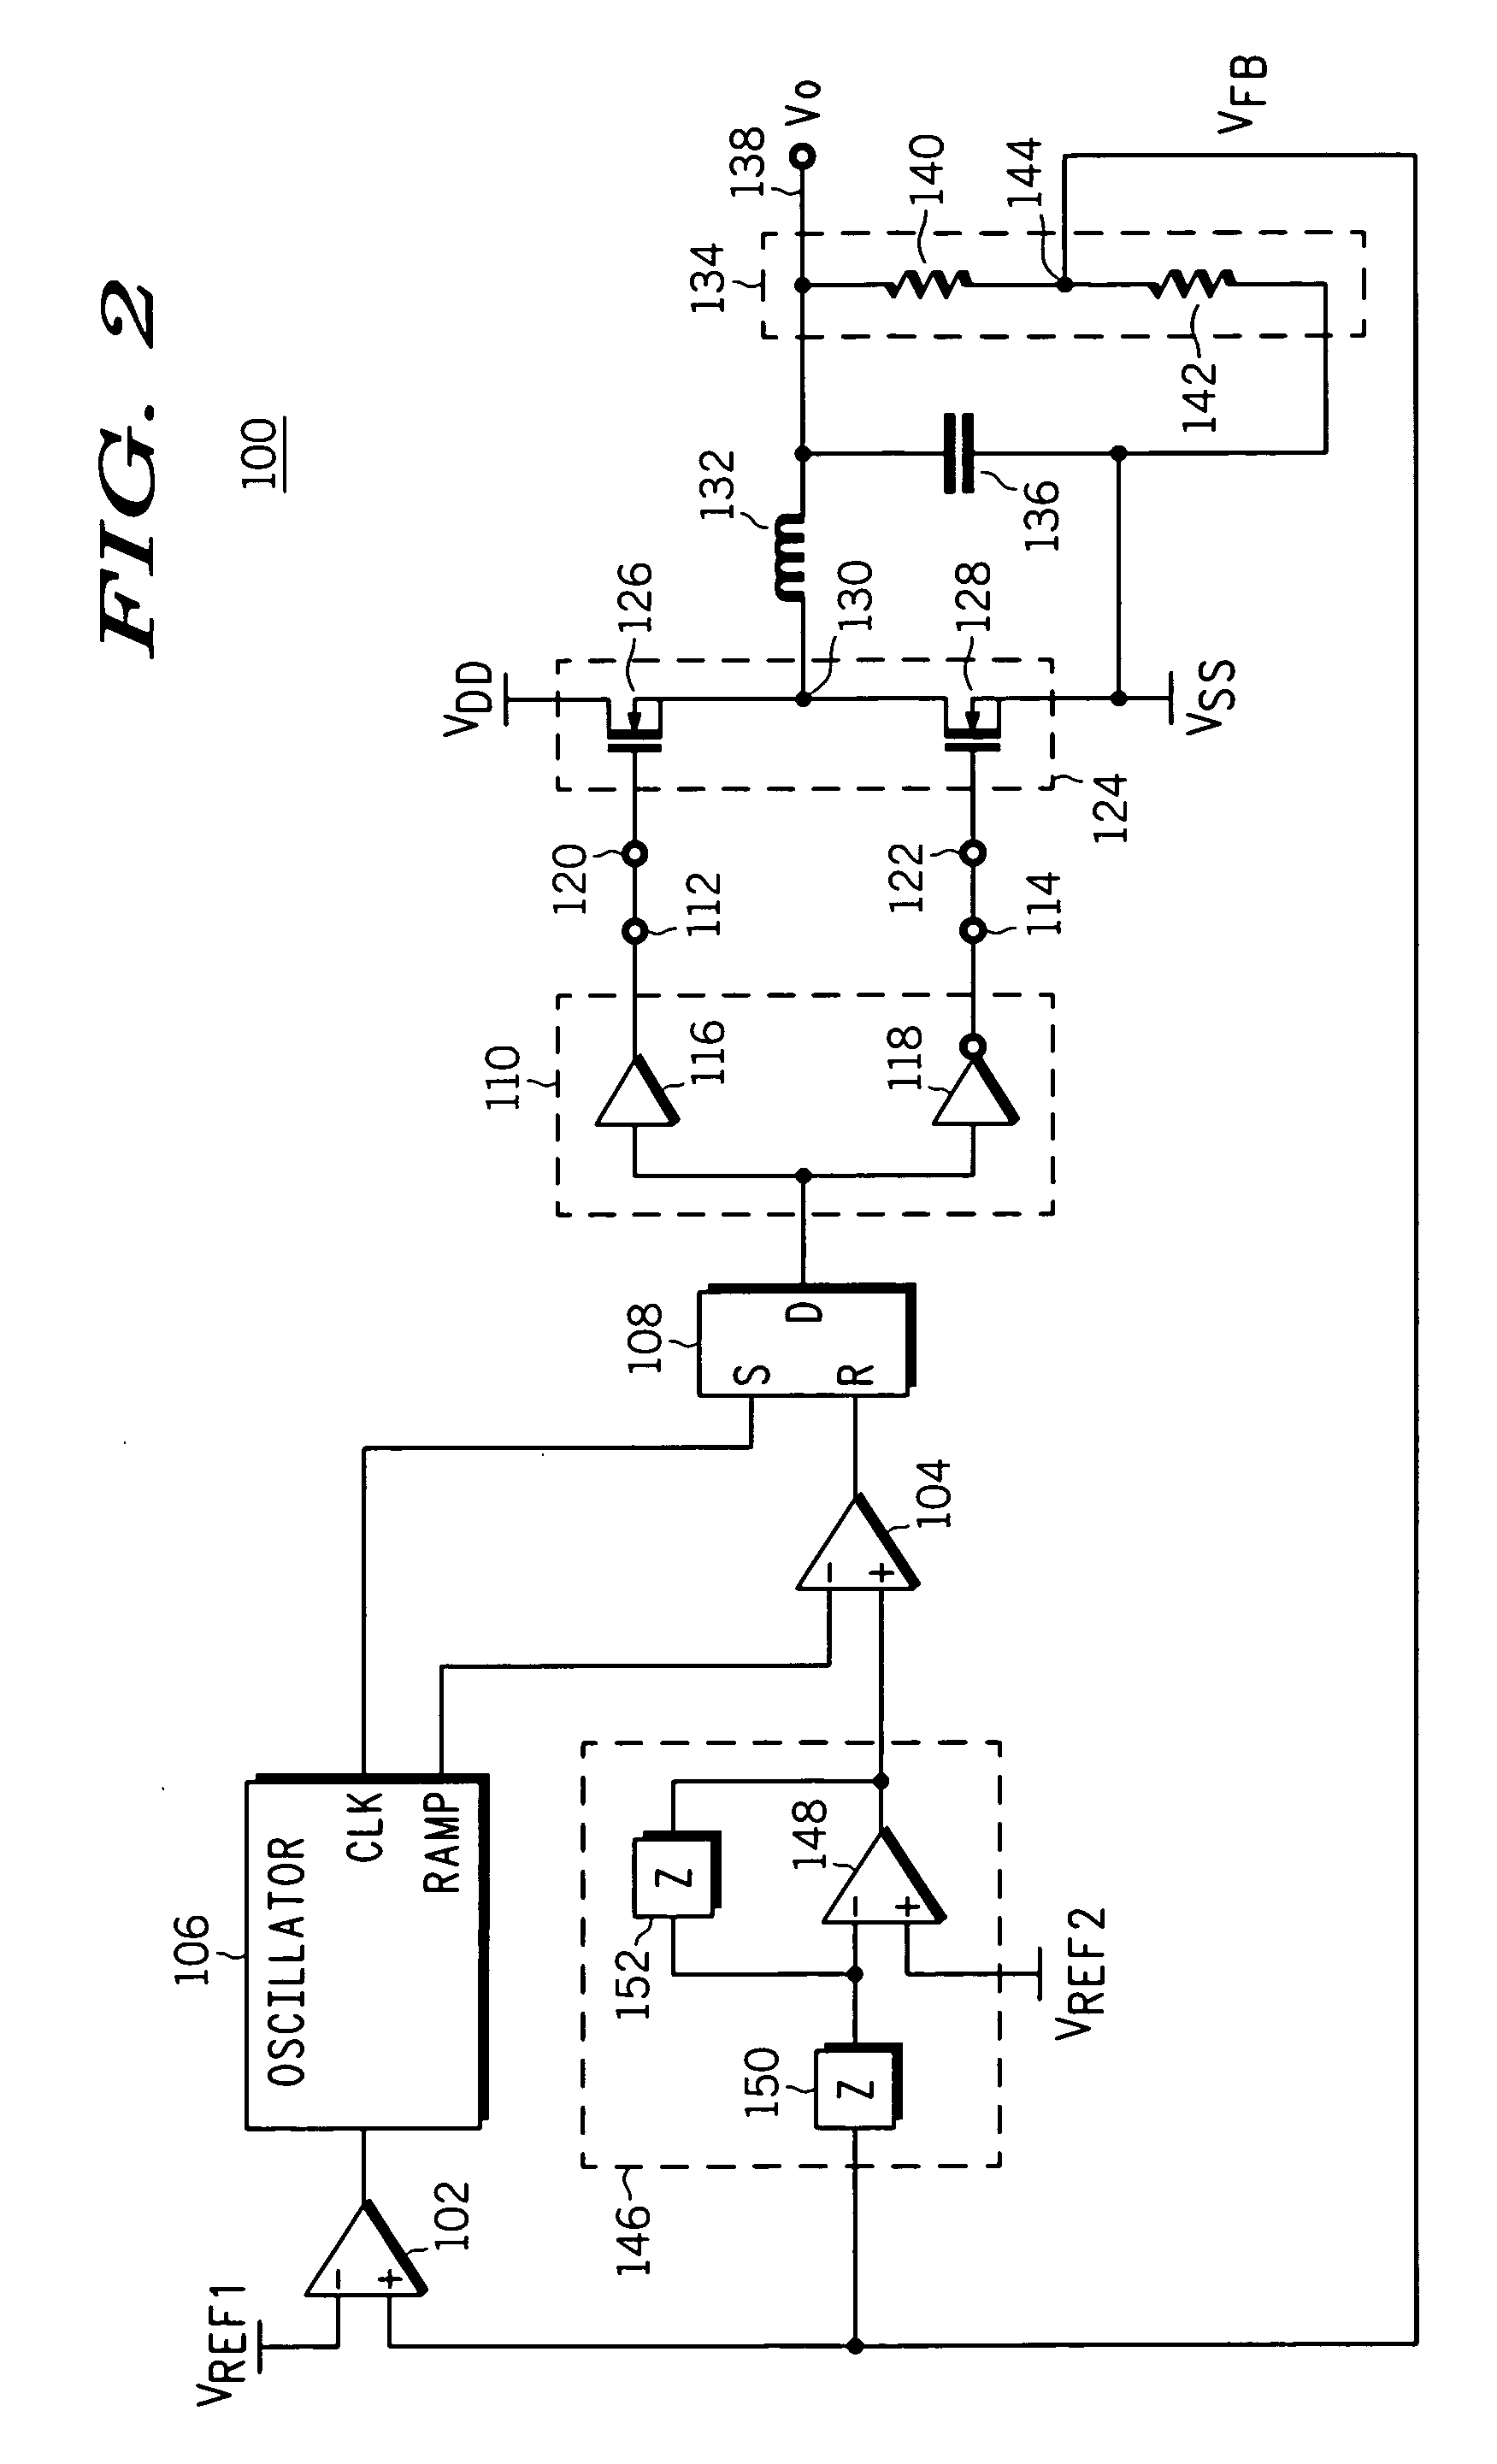 Method for regulating an output signal and circuit therefor